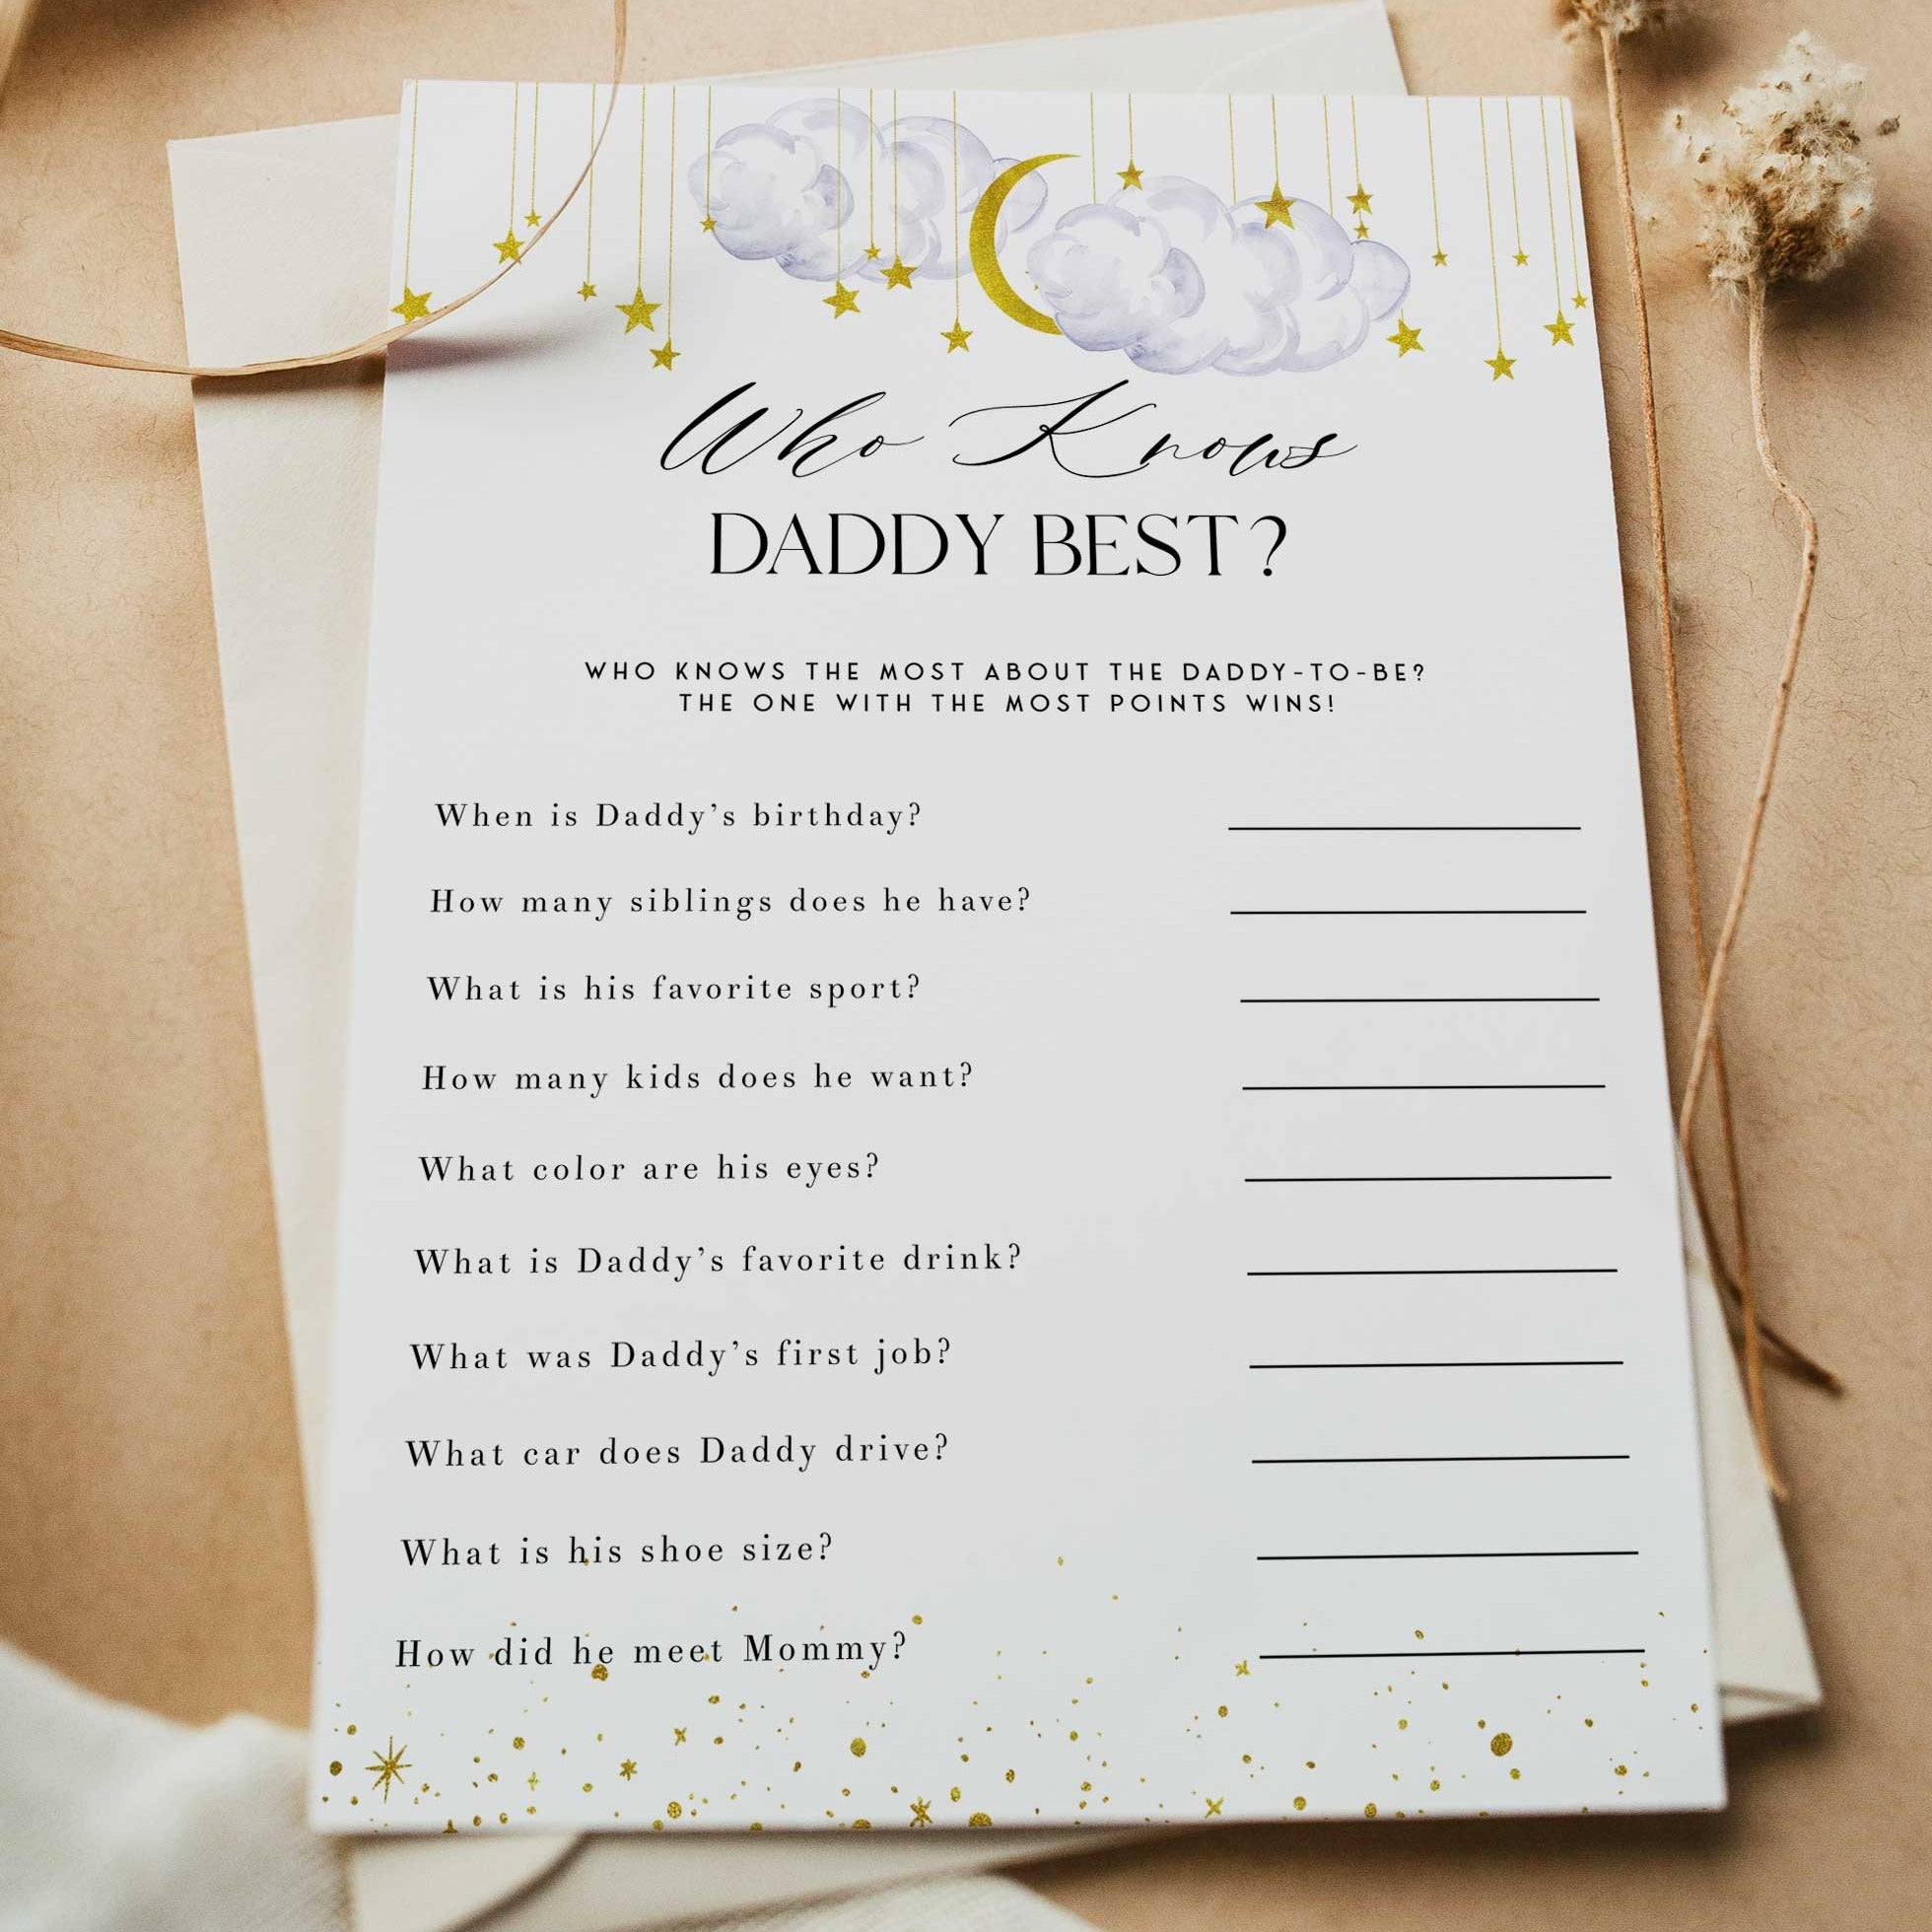 Fully editable and printable baby shower who knows daddy best game with a little star design. Perfect for a Twinkle Little Star baby shower themed party